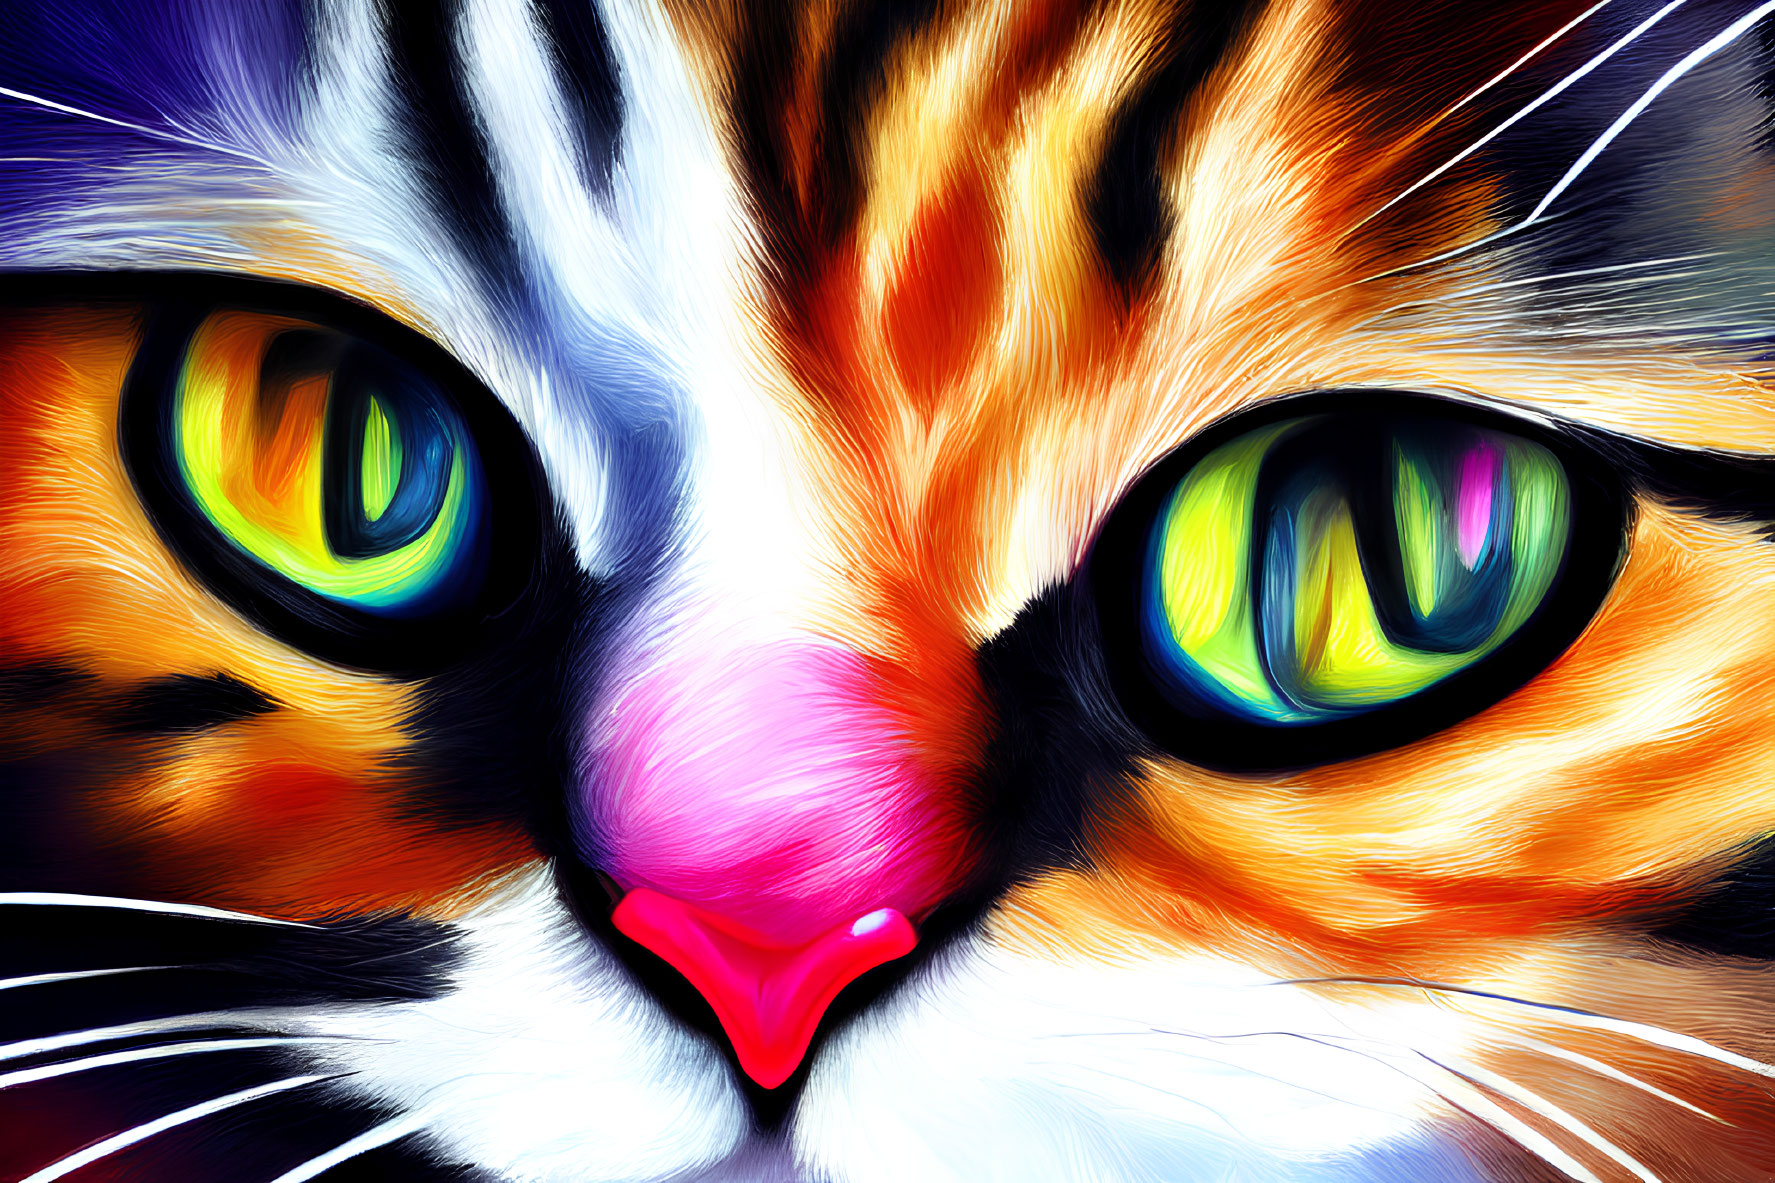 Vibrant close-up digital cat face artwork with green eyes, orange fur, and white whiskers